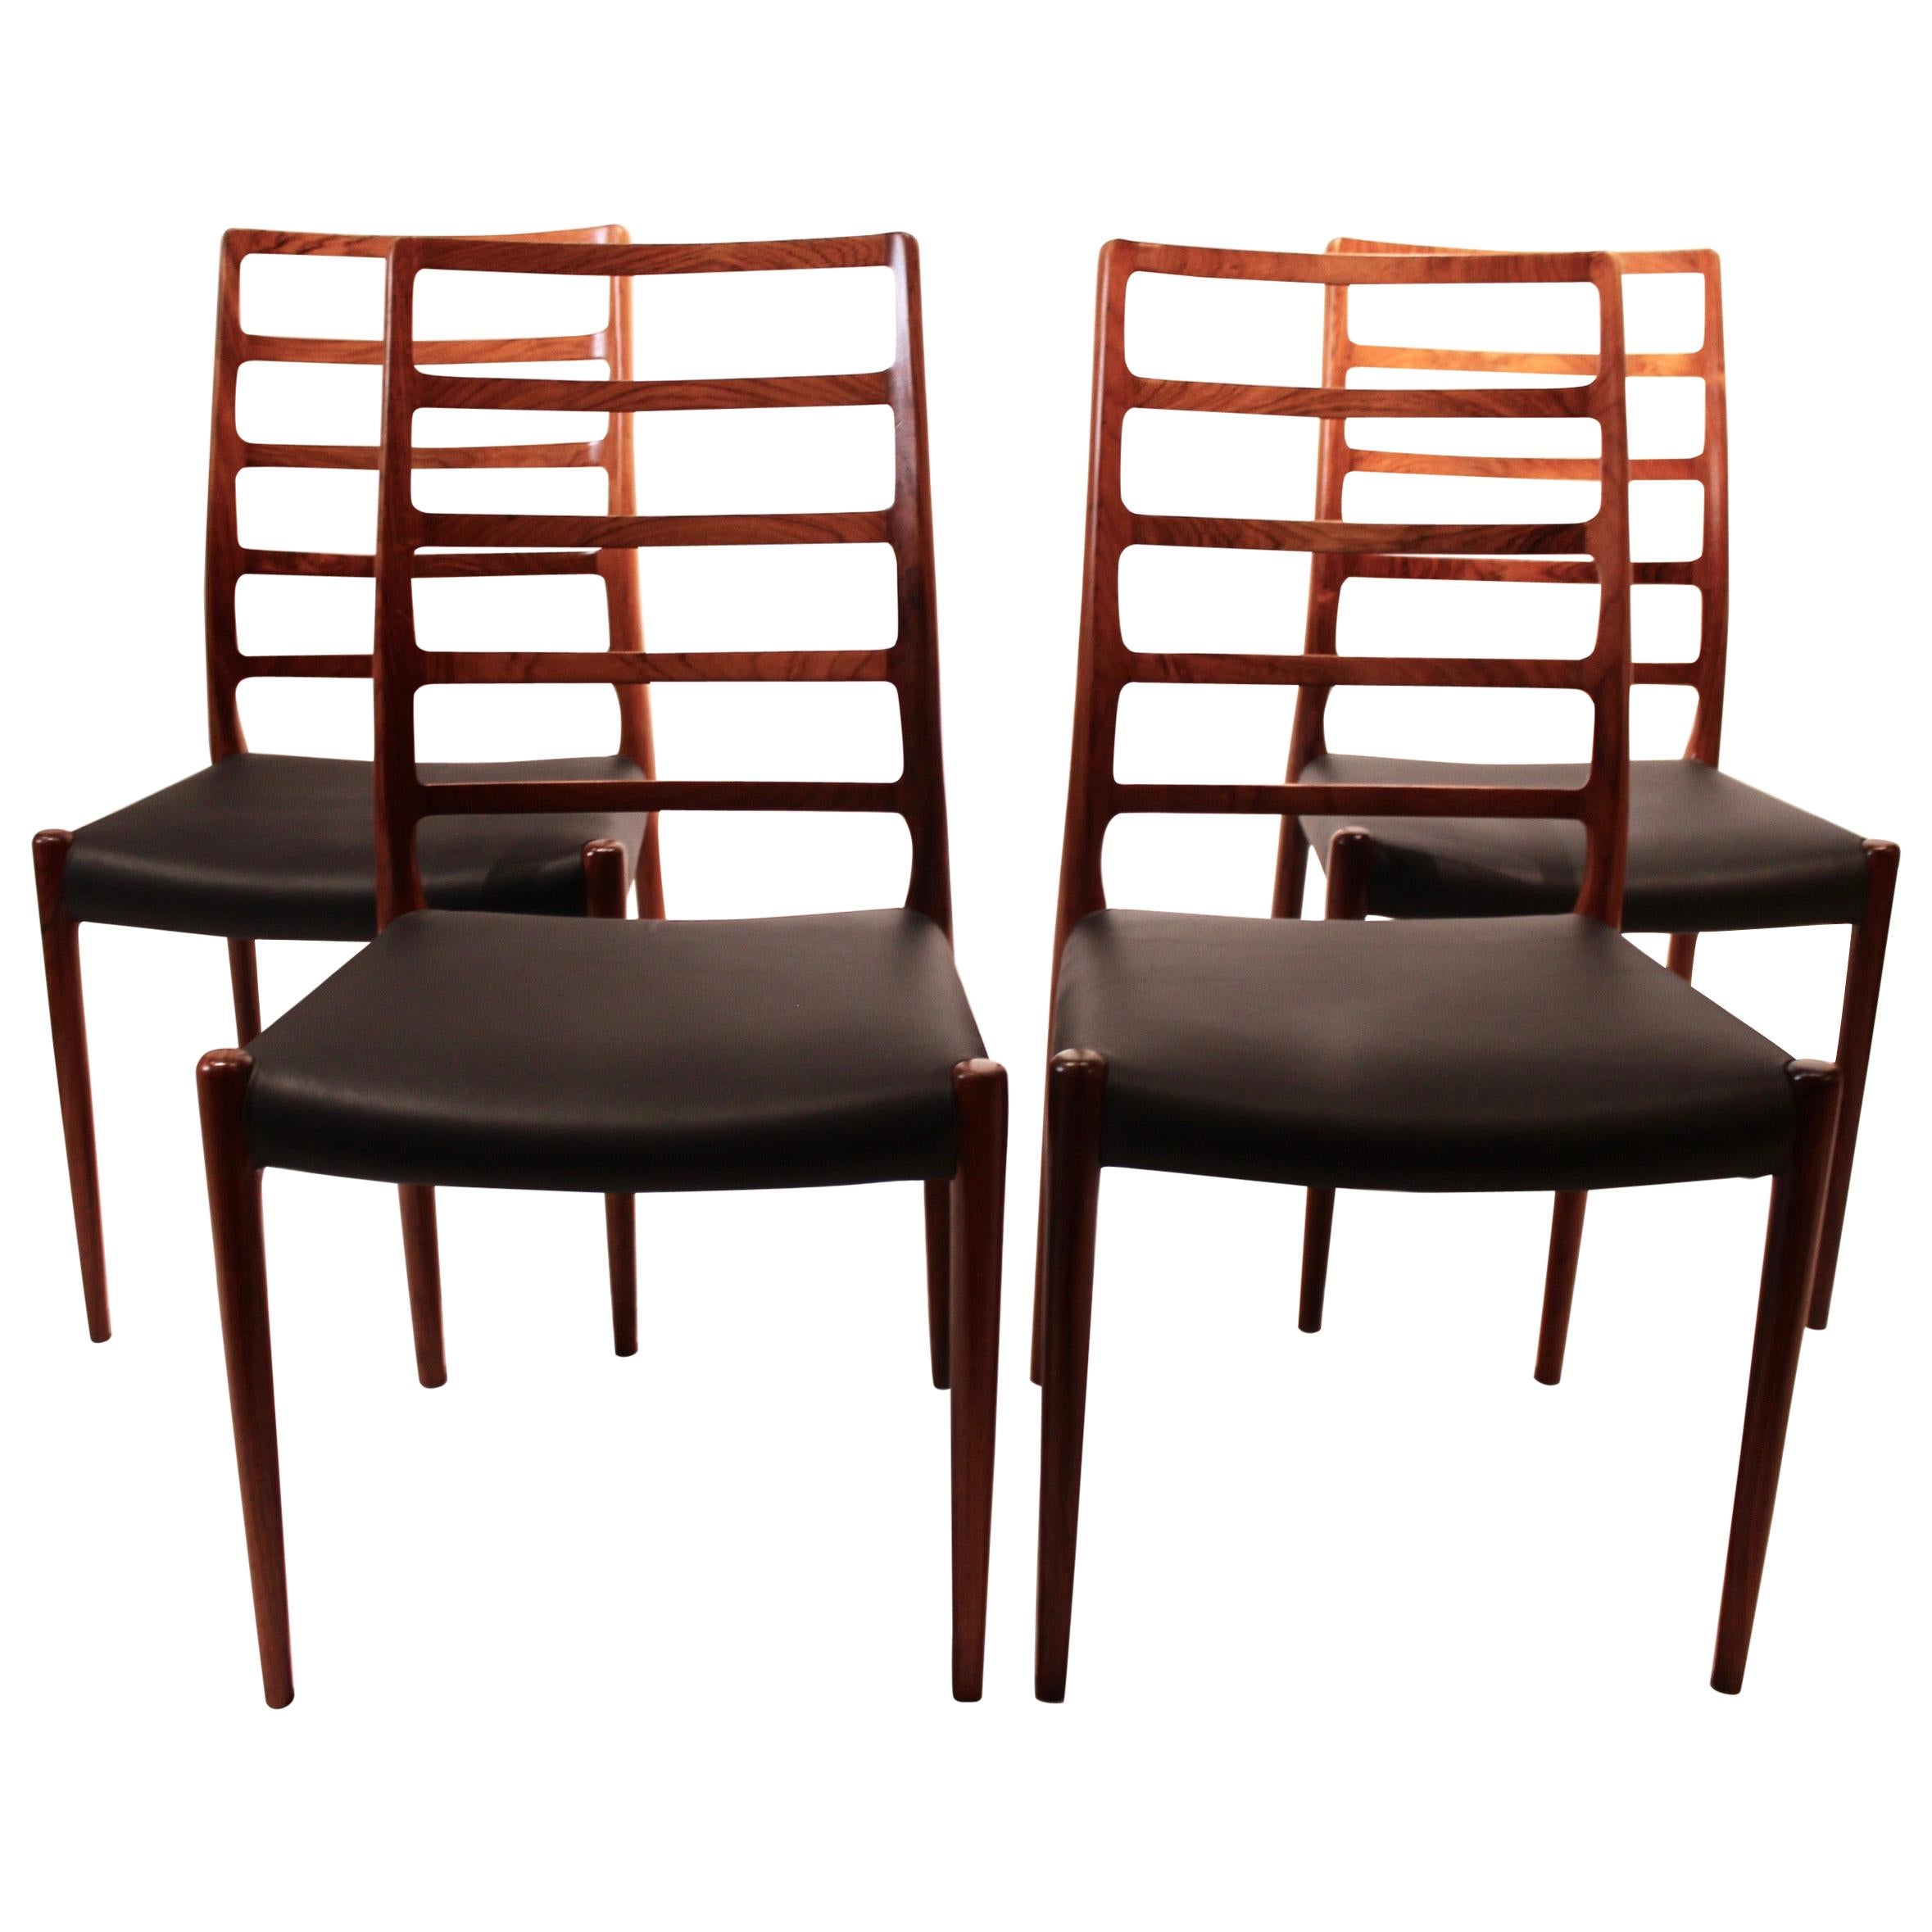 Set of Four Dining Chairs, Model 82, Designed by N.O. Møller from the 1960s